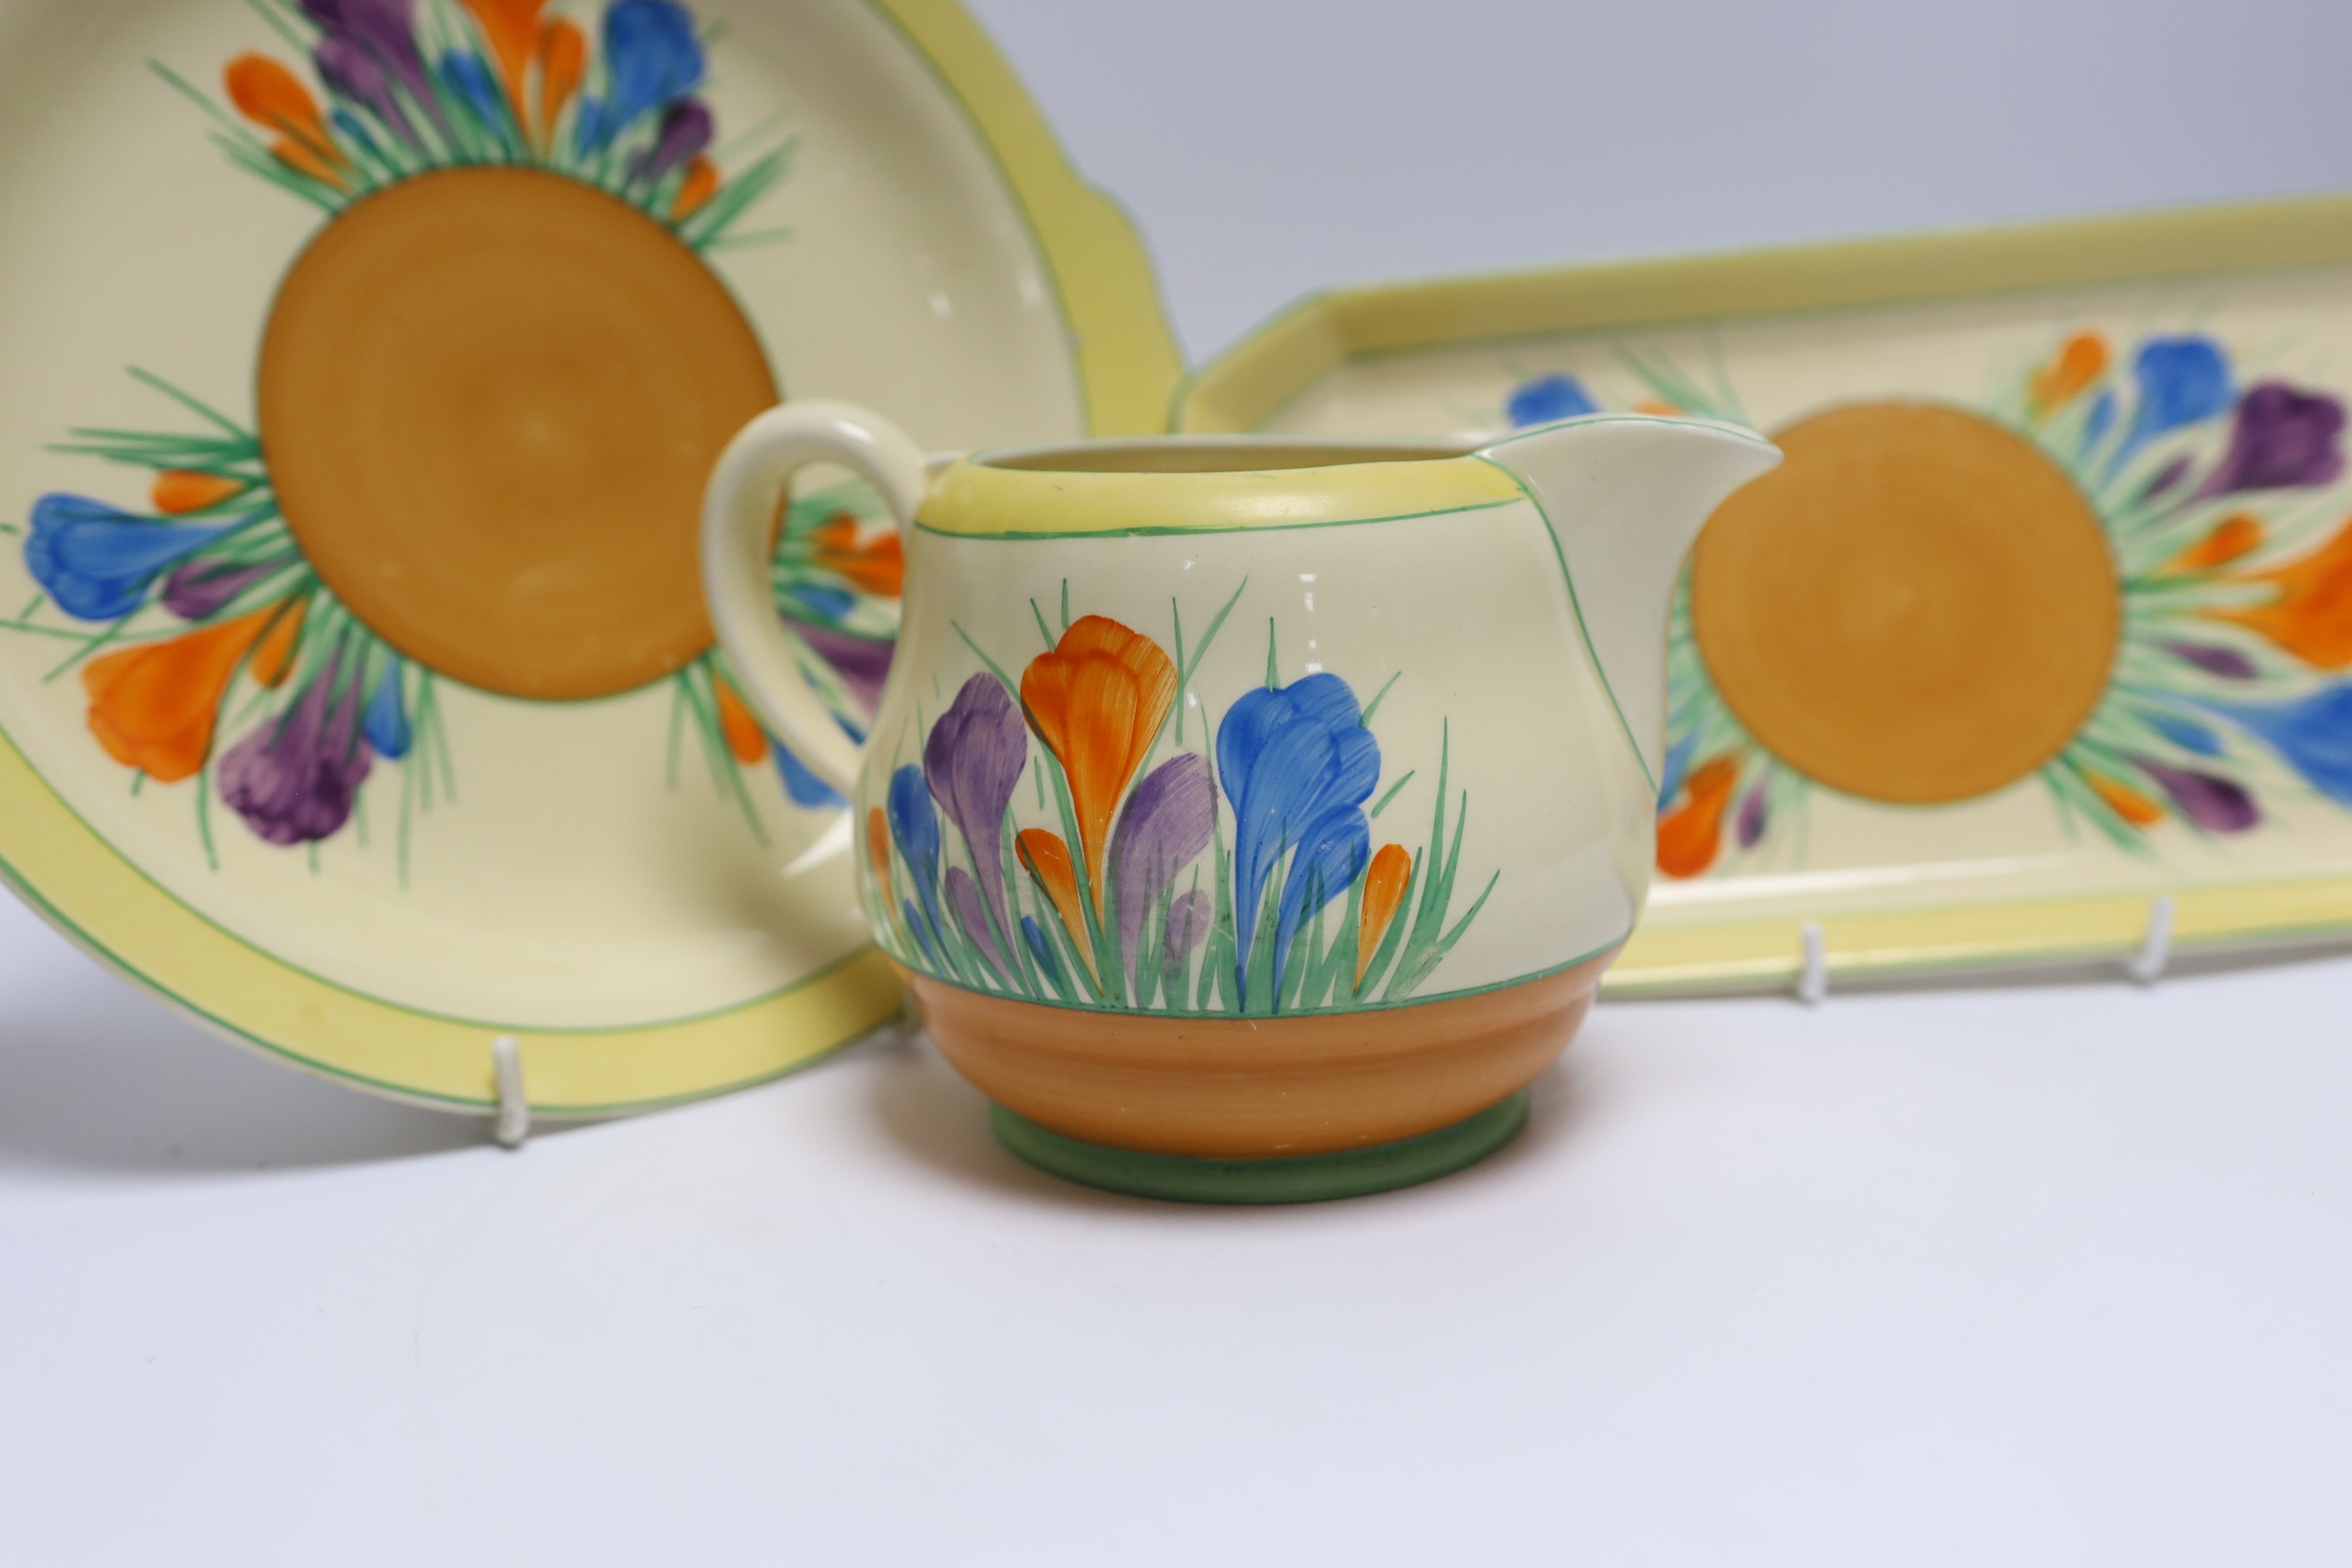 A Clarice Cliff Crocus jug and two dishes, largest 30cm long